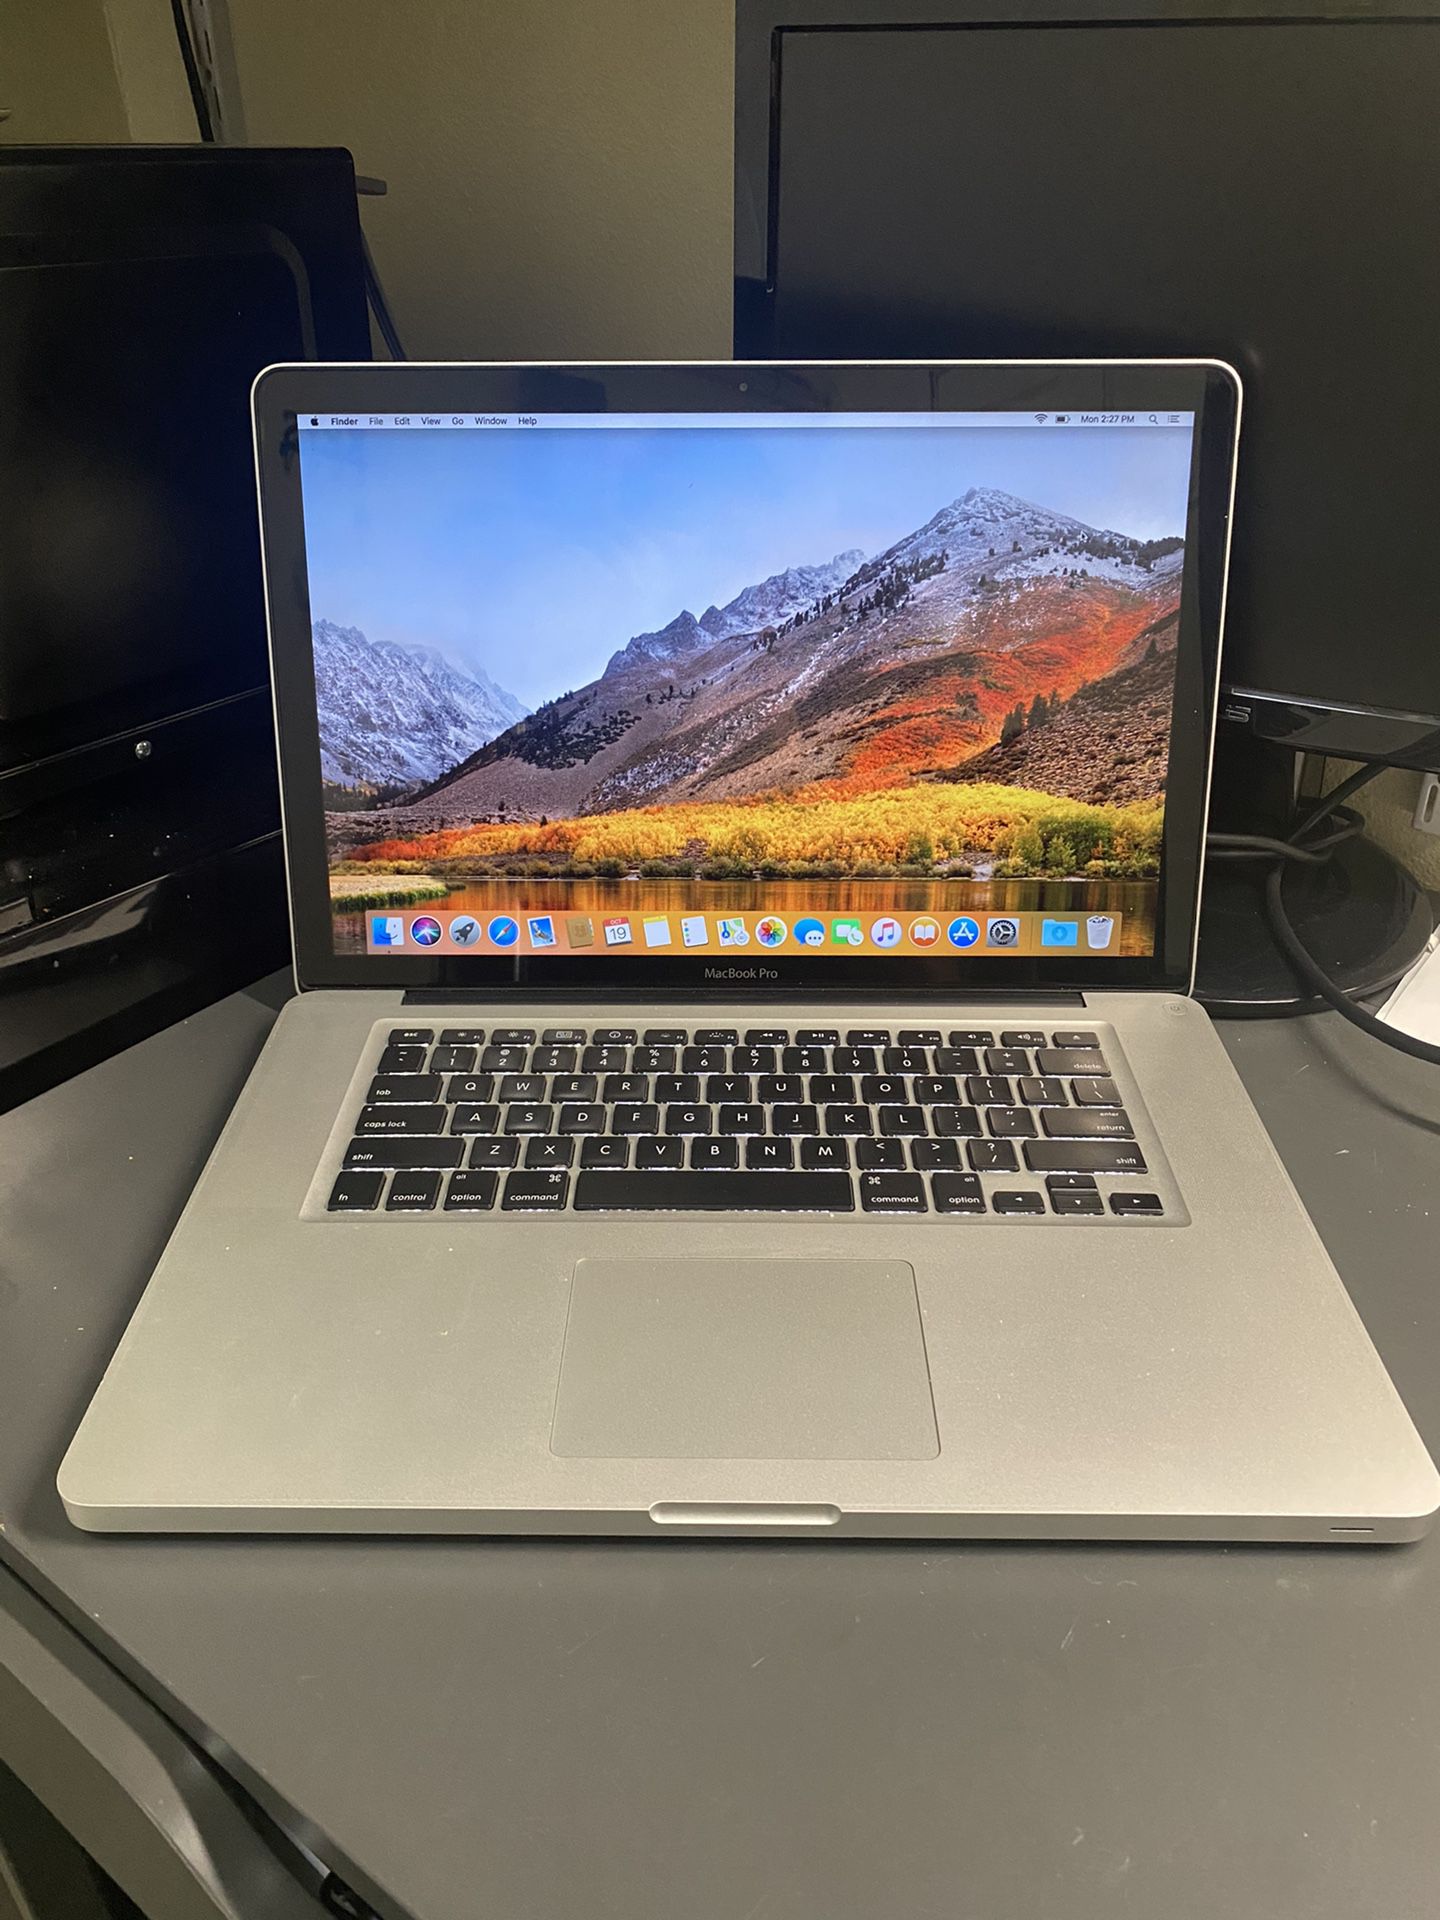 2010 MacBook Pro 15-inch core i7, 4GB Ram, 160GB HDD, parts or repair only